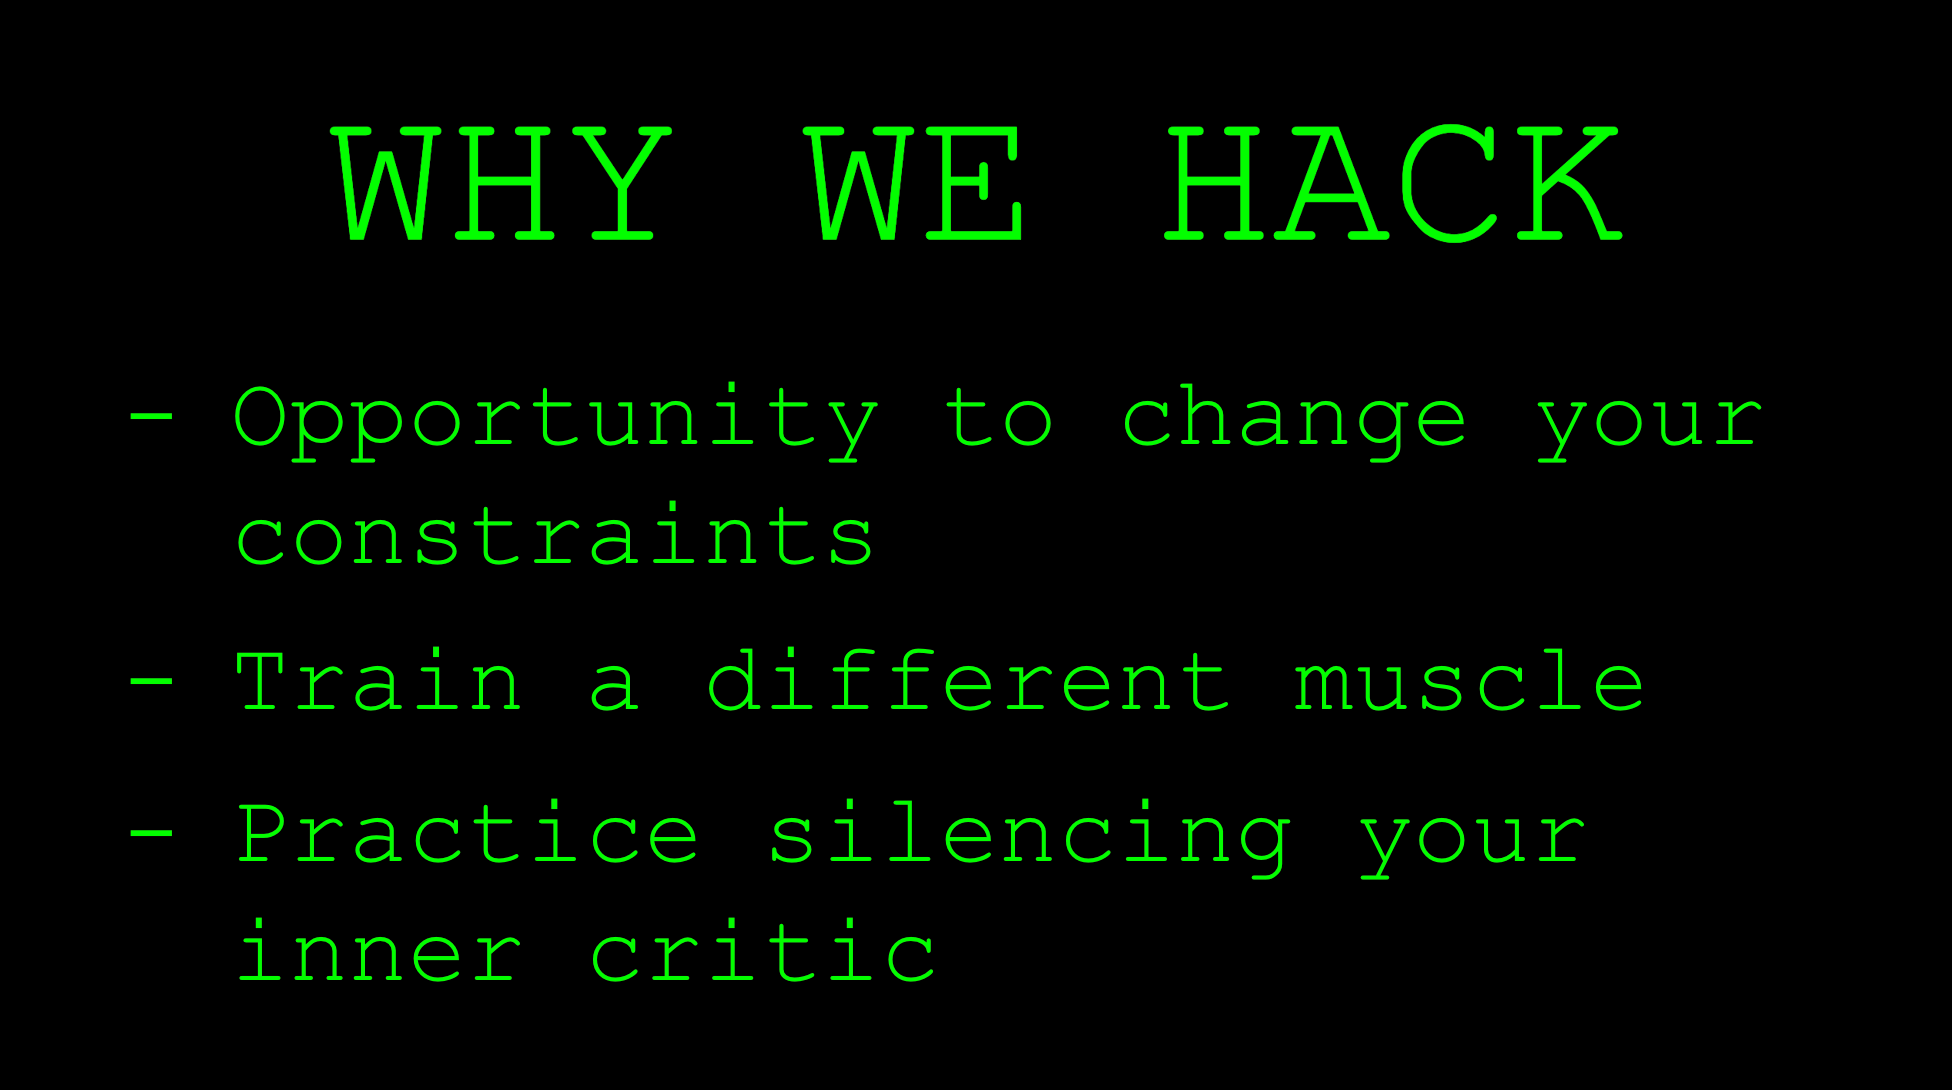 Why we hack: Opportunity to change your constraints; Train a different muscle; Practice silencing your inner critic